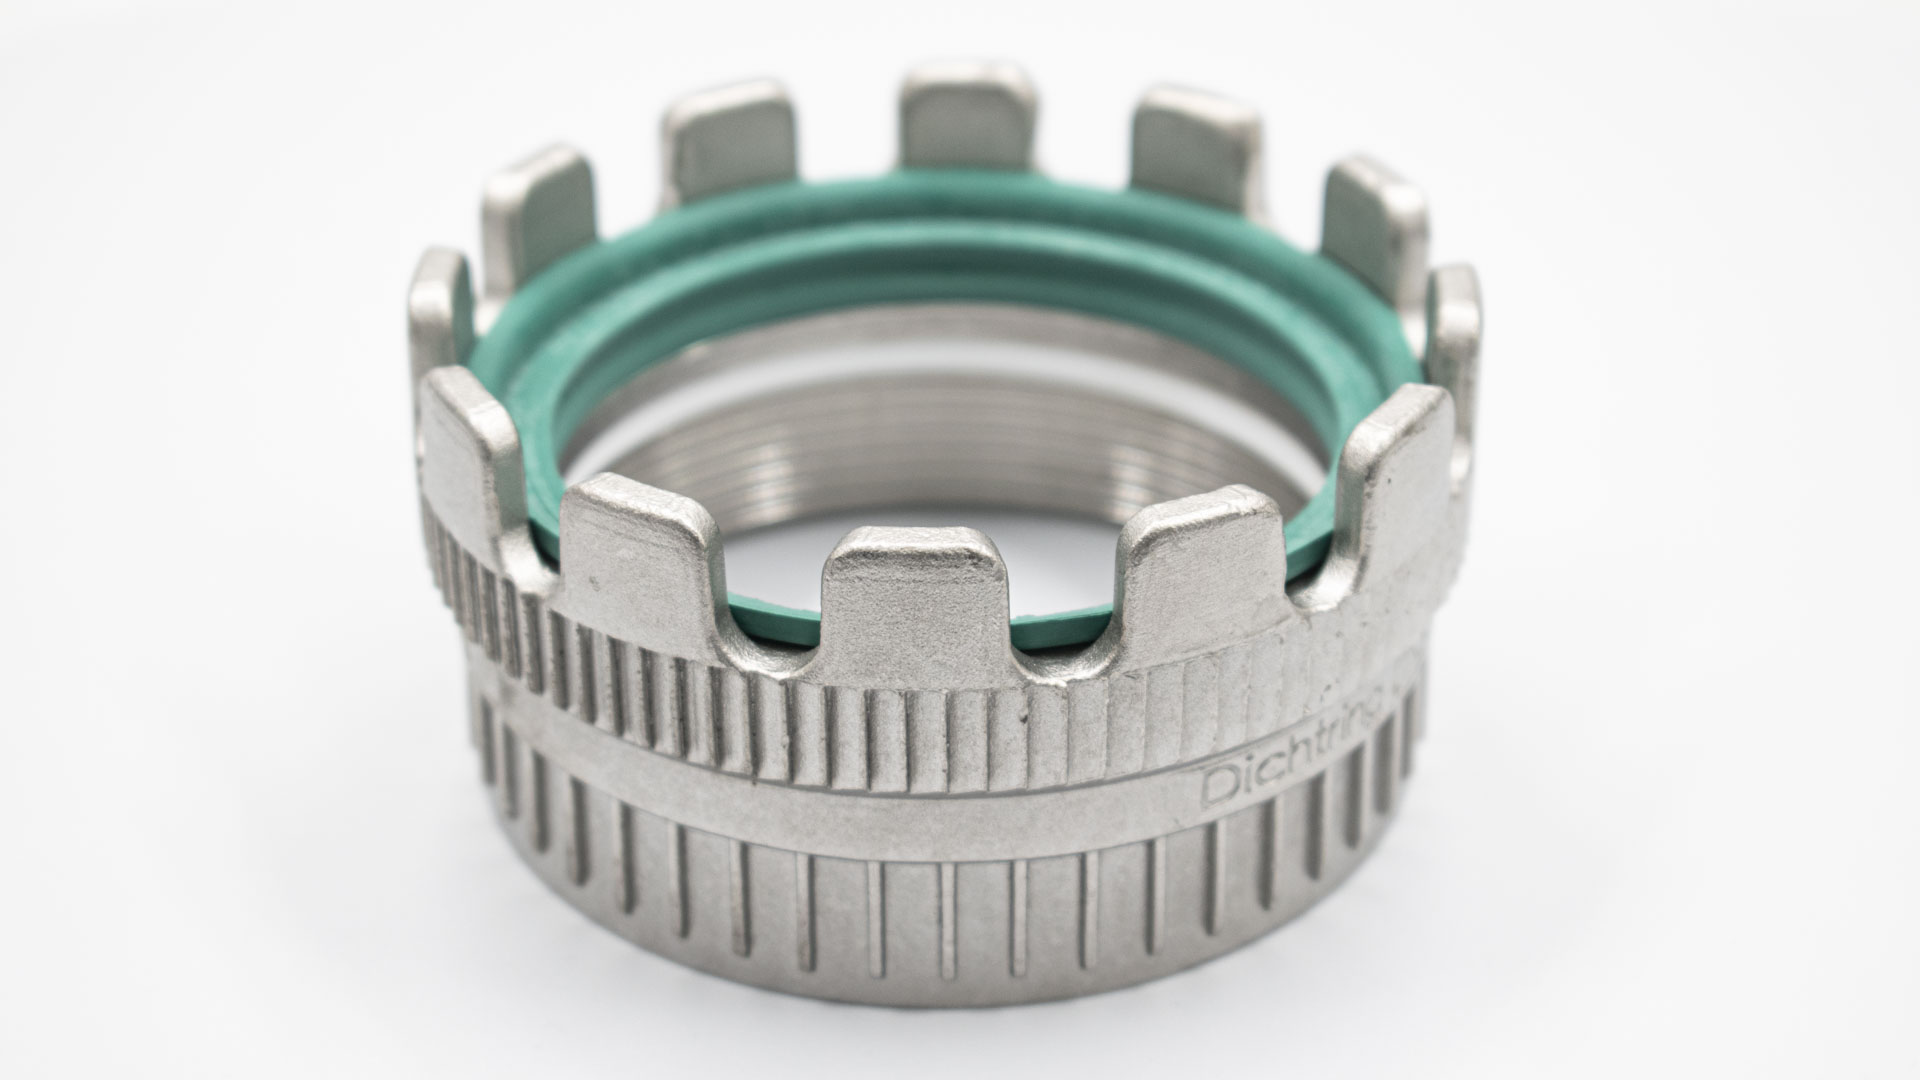 TW sealing ring piece made of stainless steel according to DIN EN 14420-6 (DIN 28450)